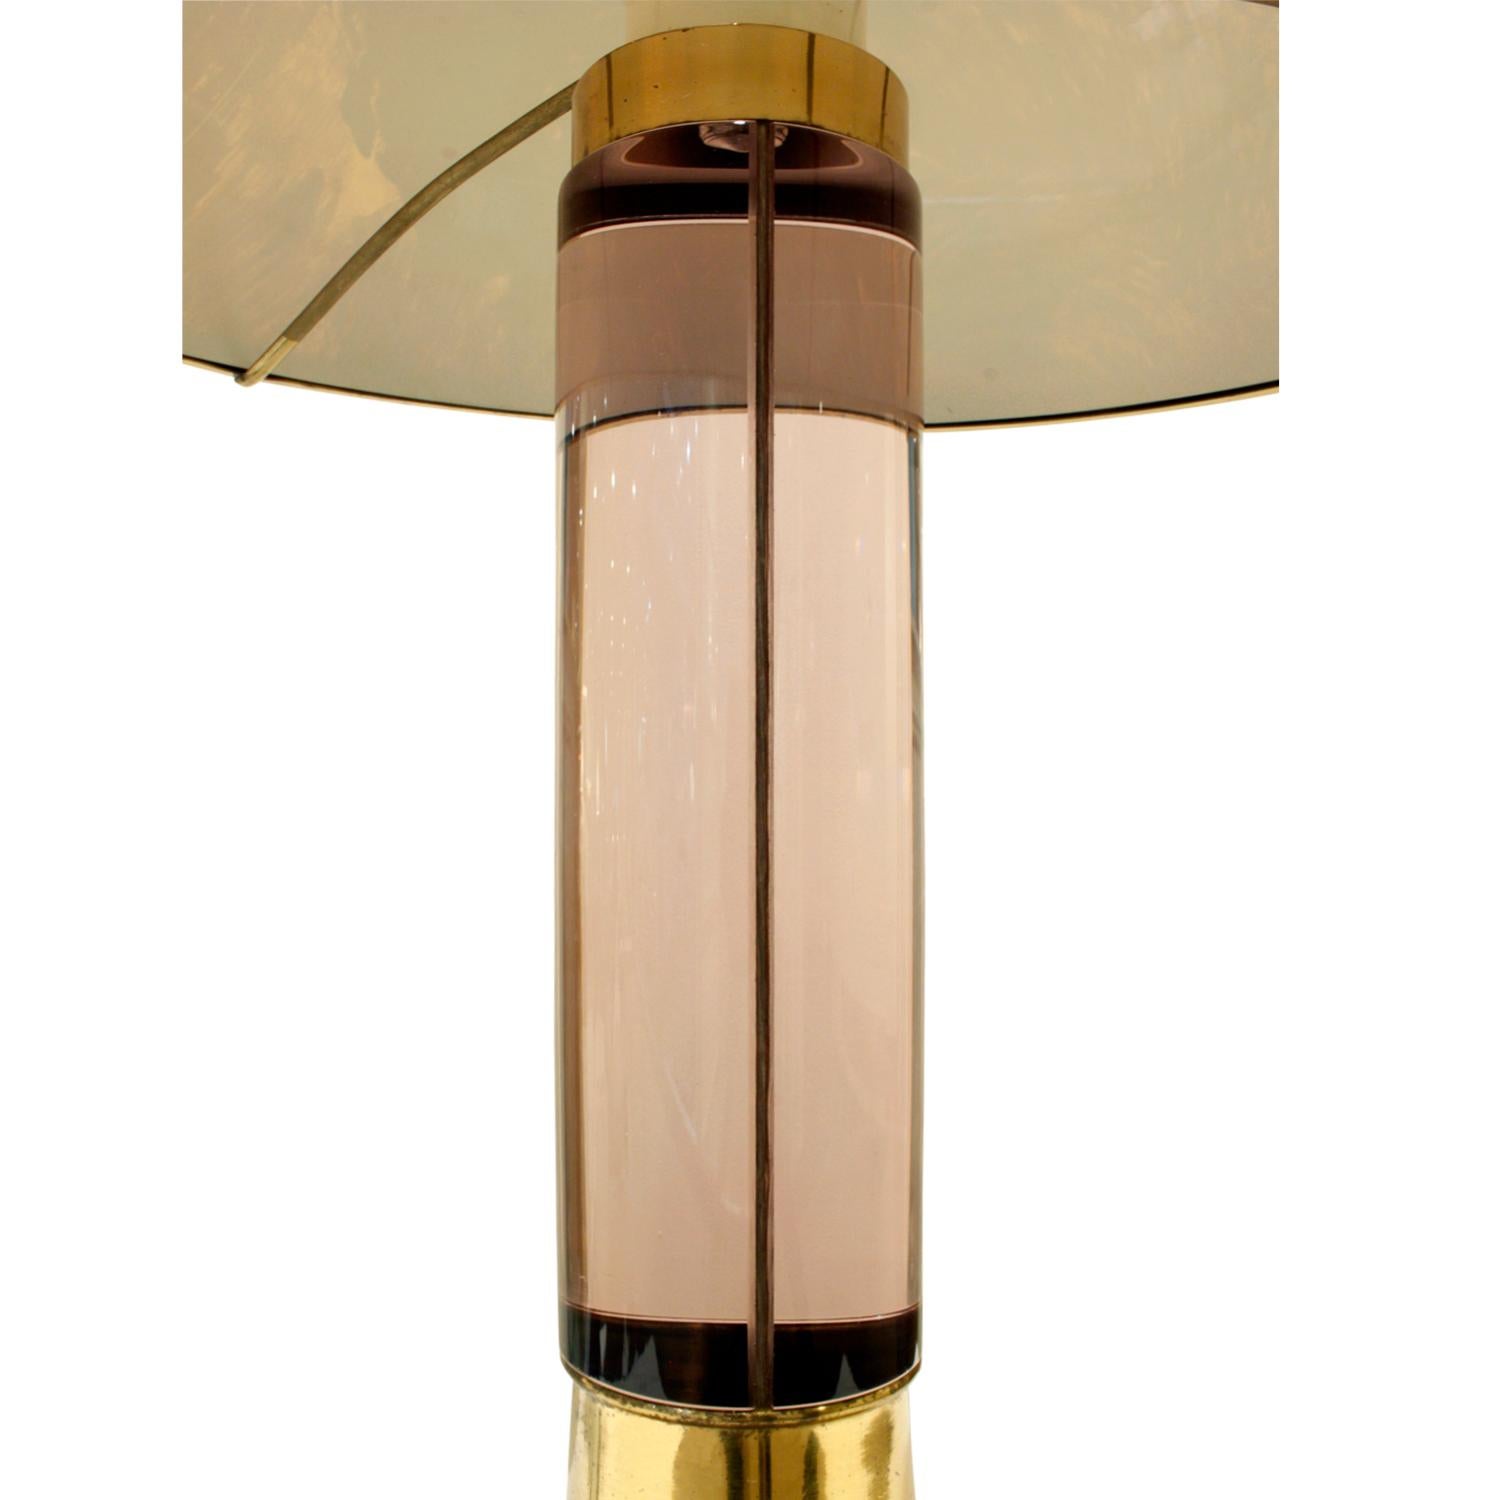 Hand-Crafted Chic Table Lamp with Tortoiseshell Lucite Shade, 1970s